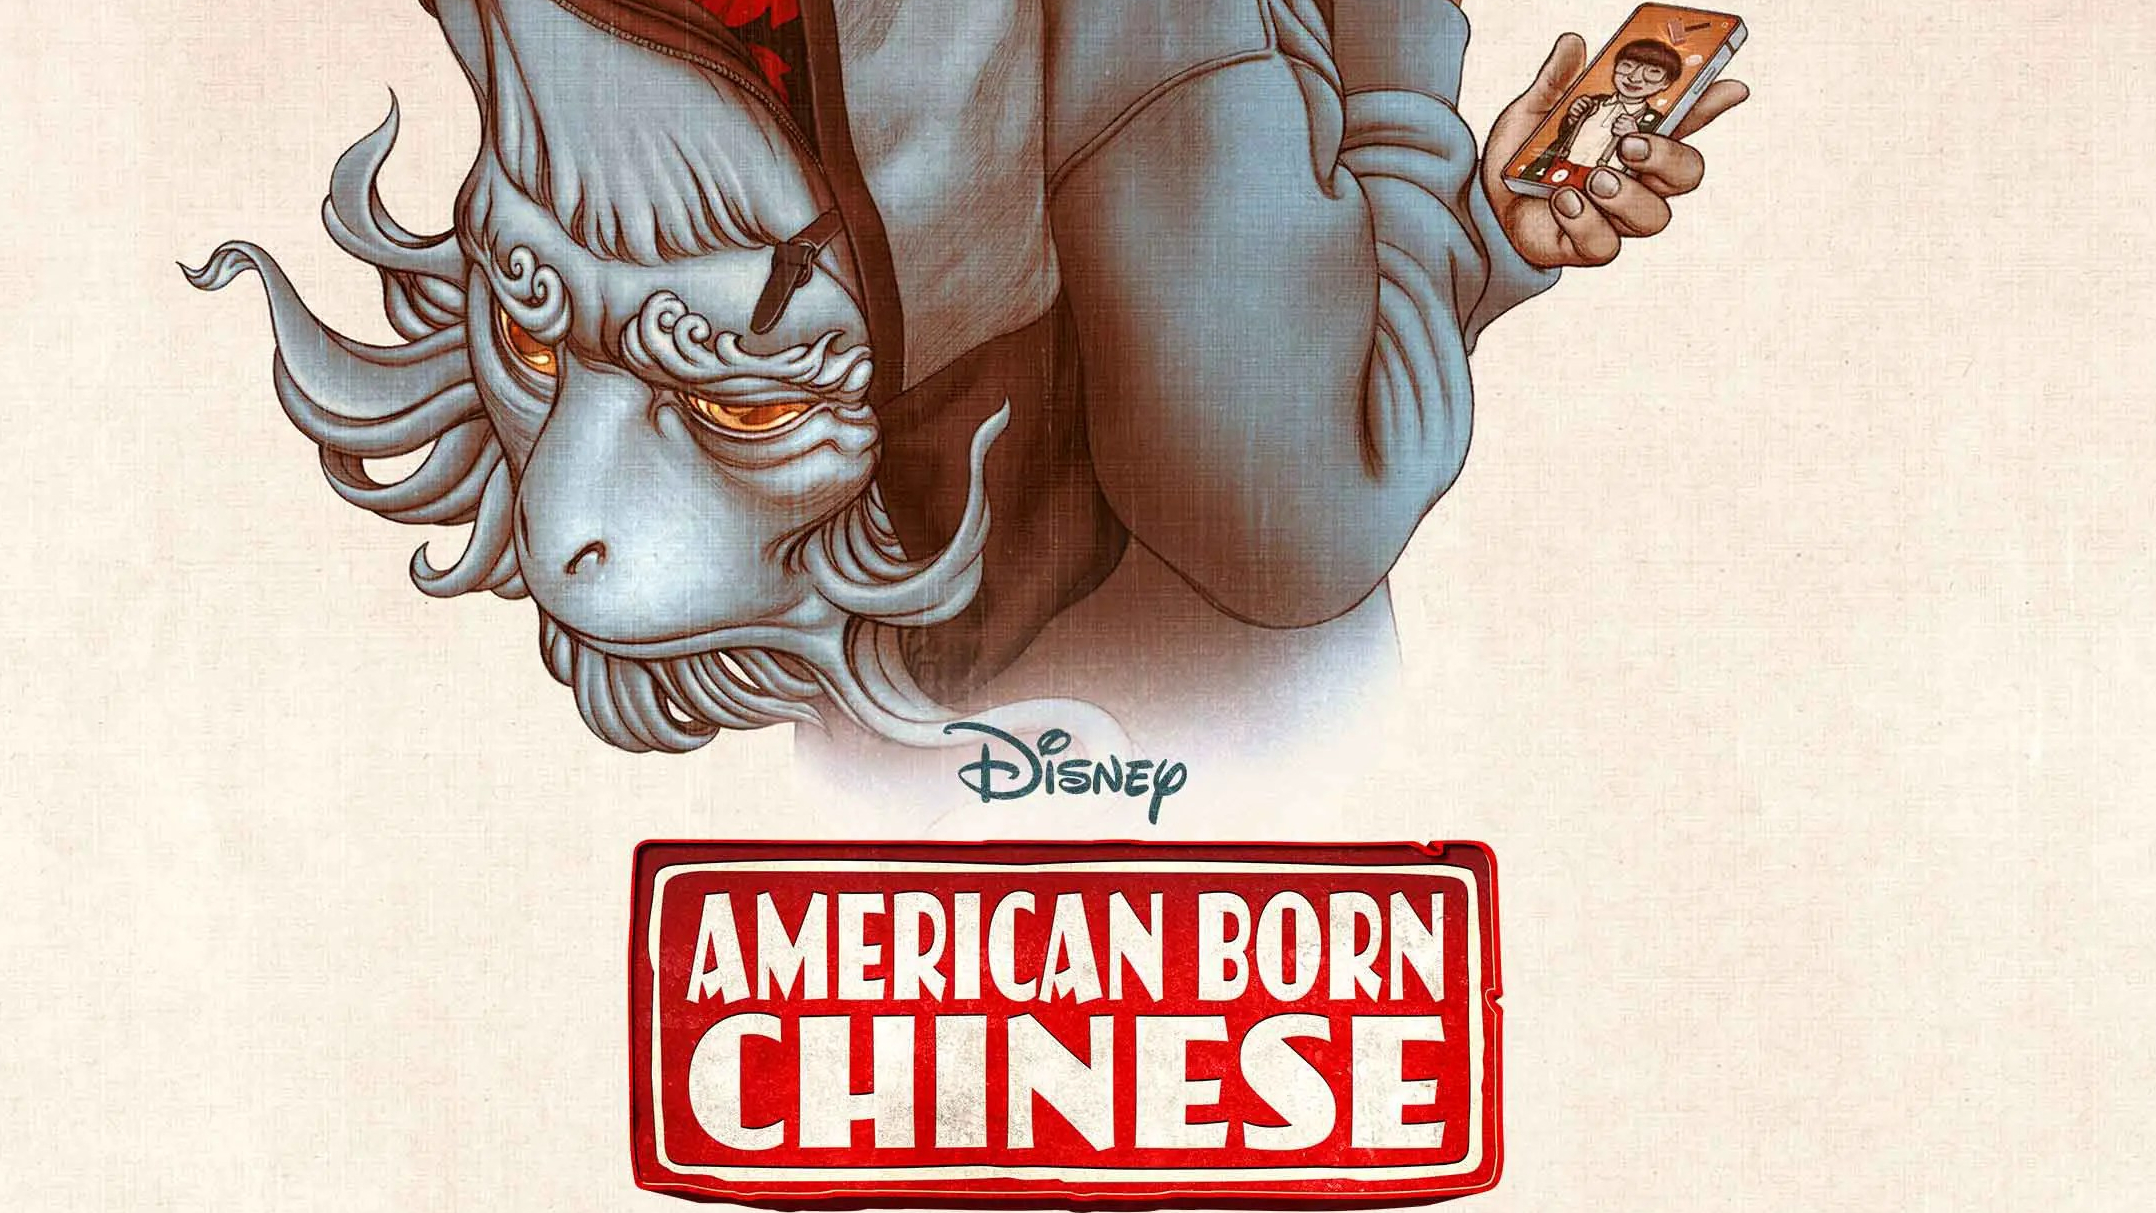 SEE IT: Disney Reveals New ‘American Born Chinese’ Poster Ahead Of SXSW Premiere